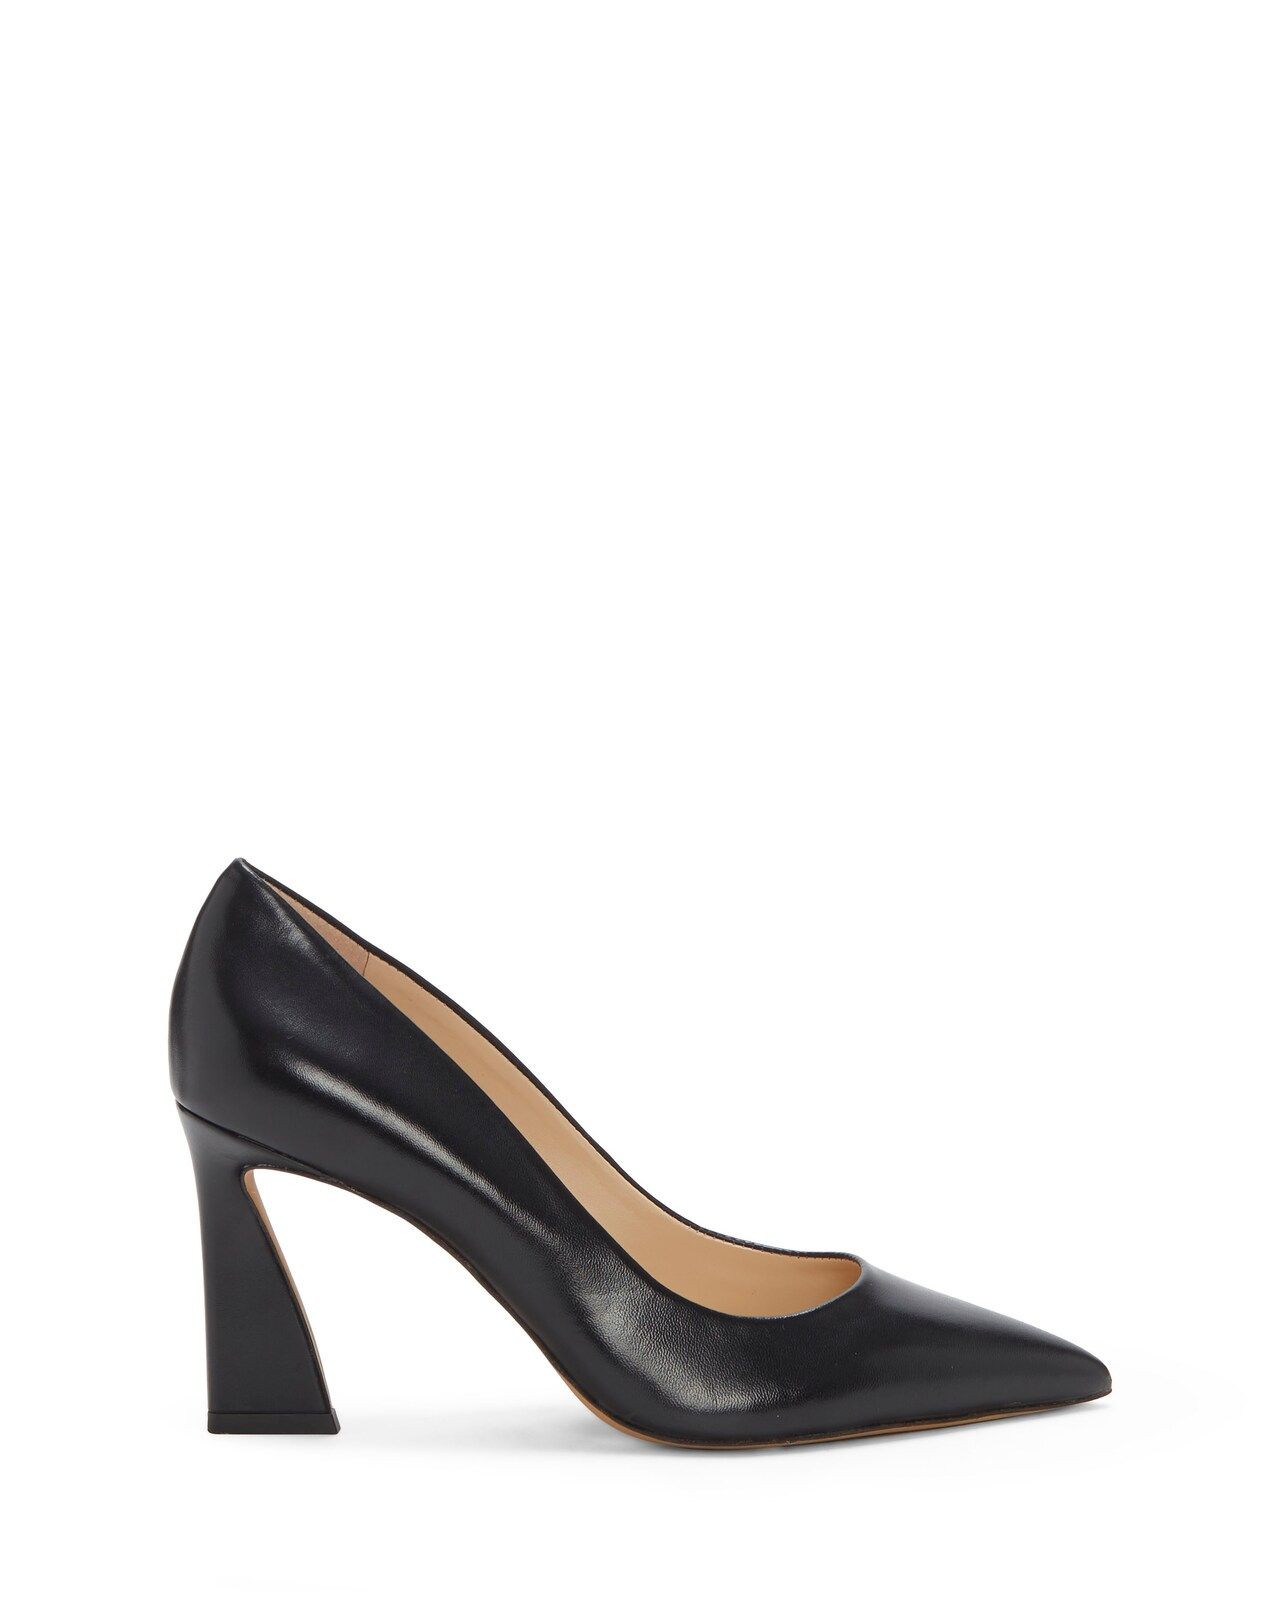 Thanley Point-Toe Pump - EXCLUDED FROM PROMOTION | Vince Camuto